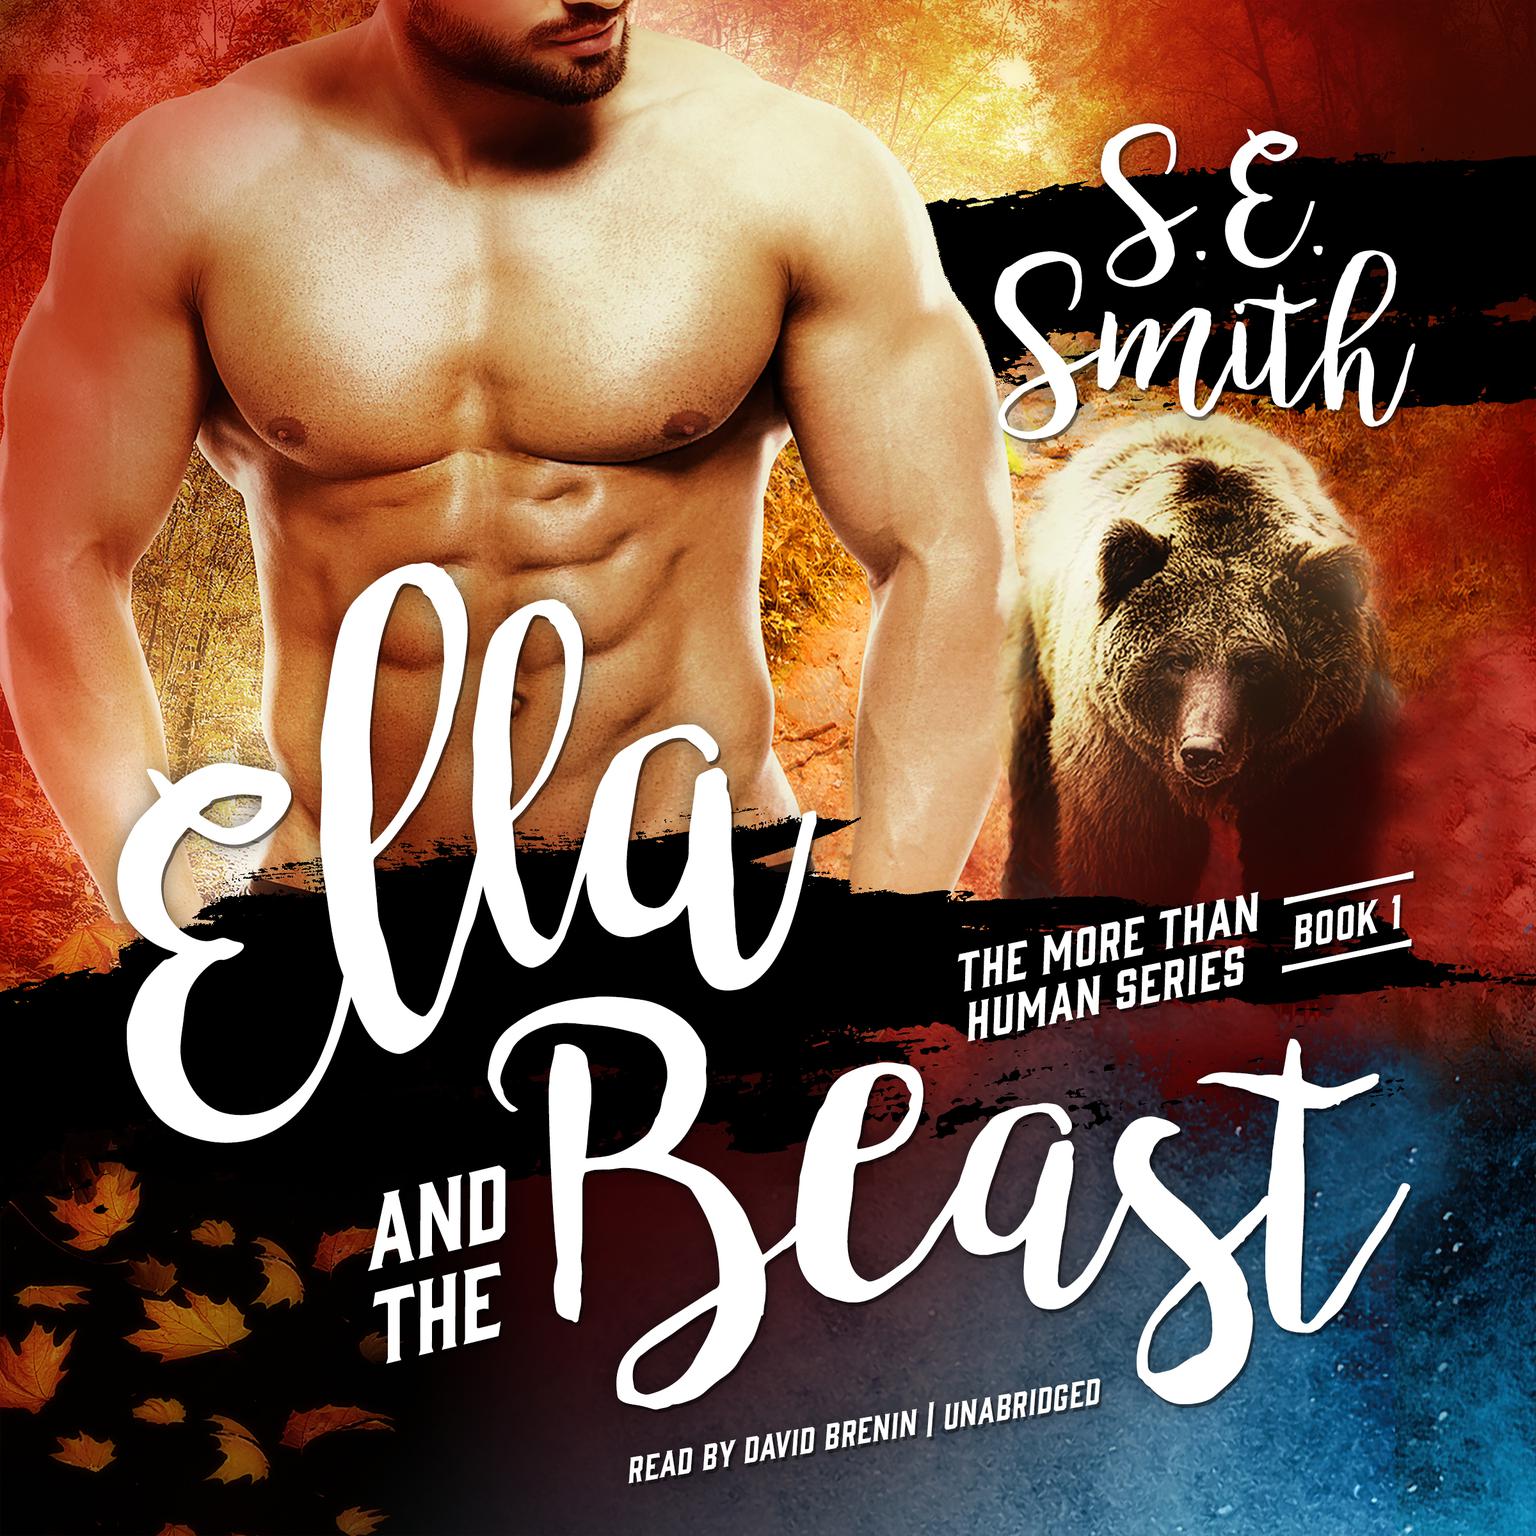 Ella and the Beast Audiobook, by S.E. Smith